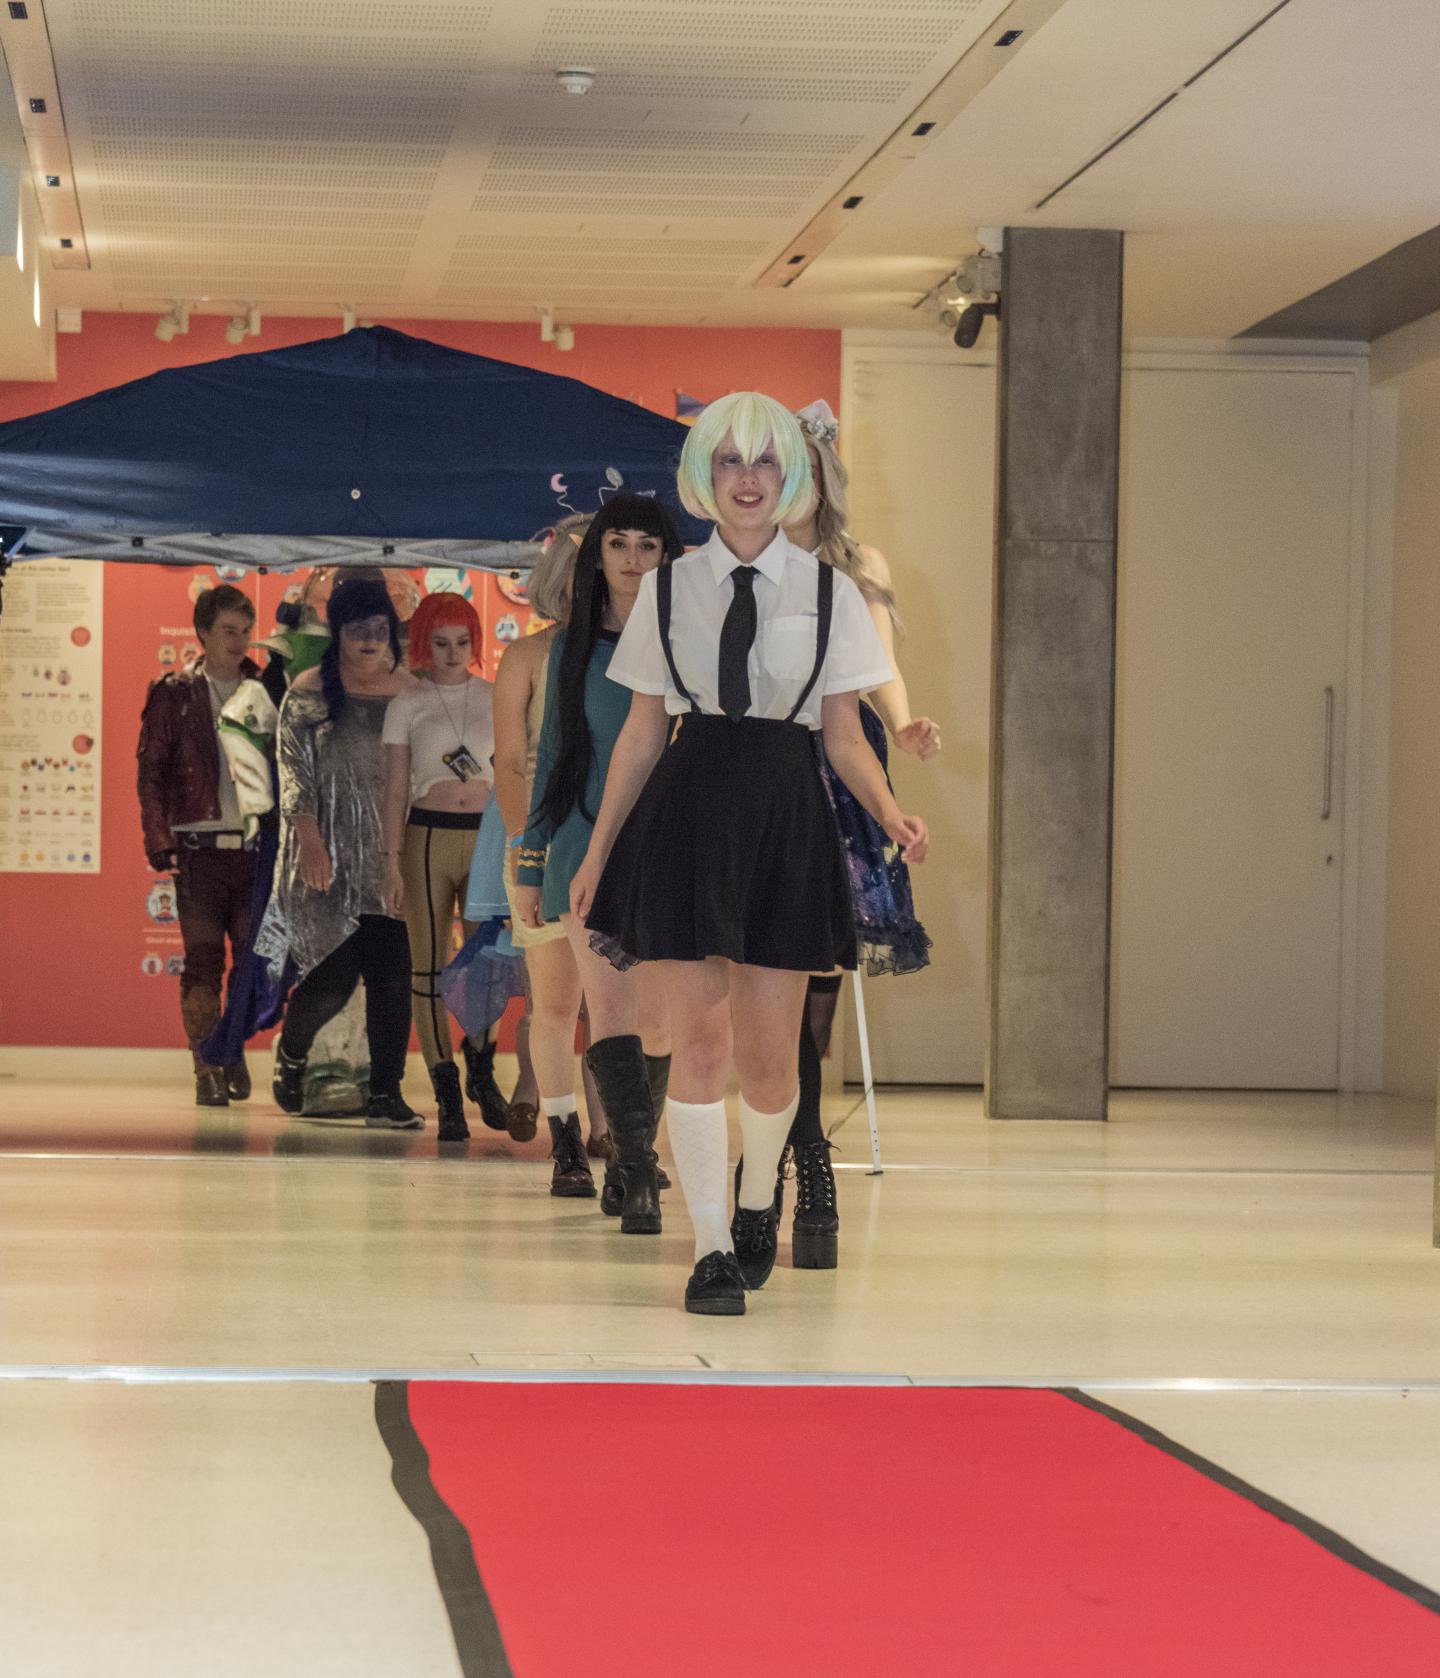 A group of young people in a line in costume walk a red carpet